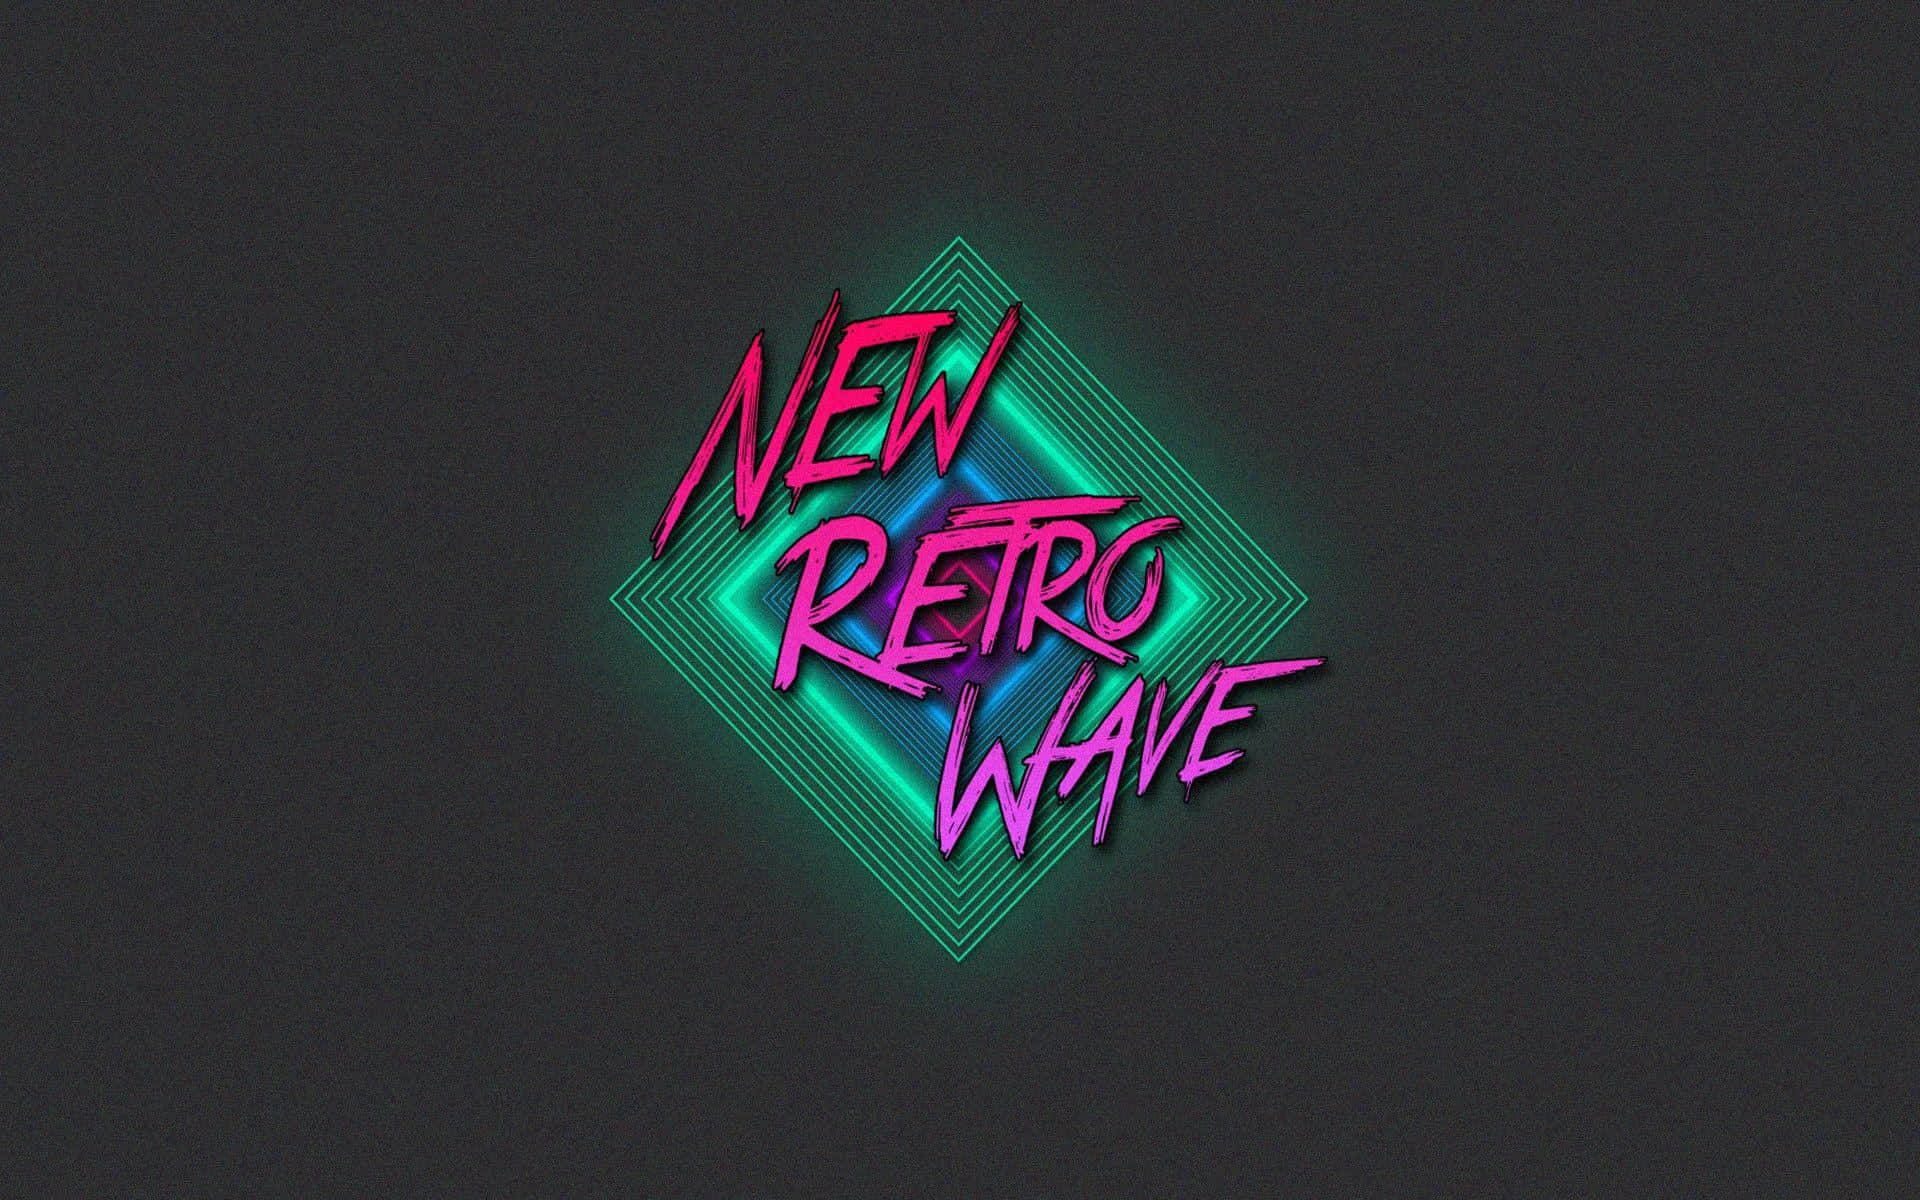 Feeling nostalgic for the '80s? Nothing can replicate the bright, neon glow of the decade. Wallpaper